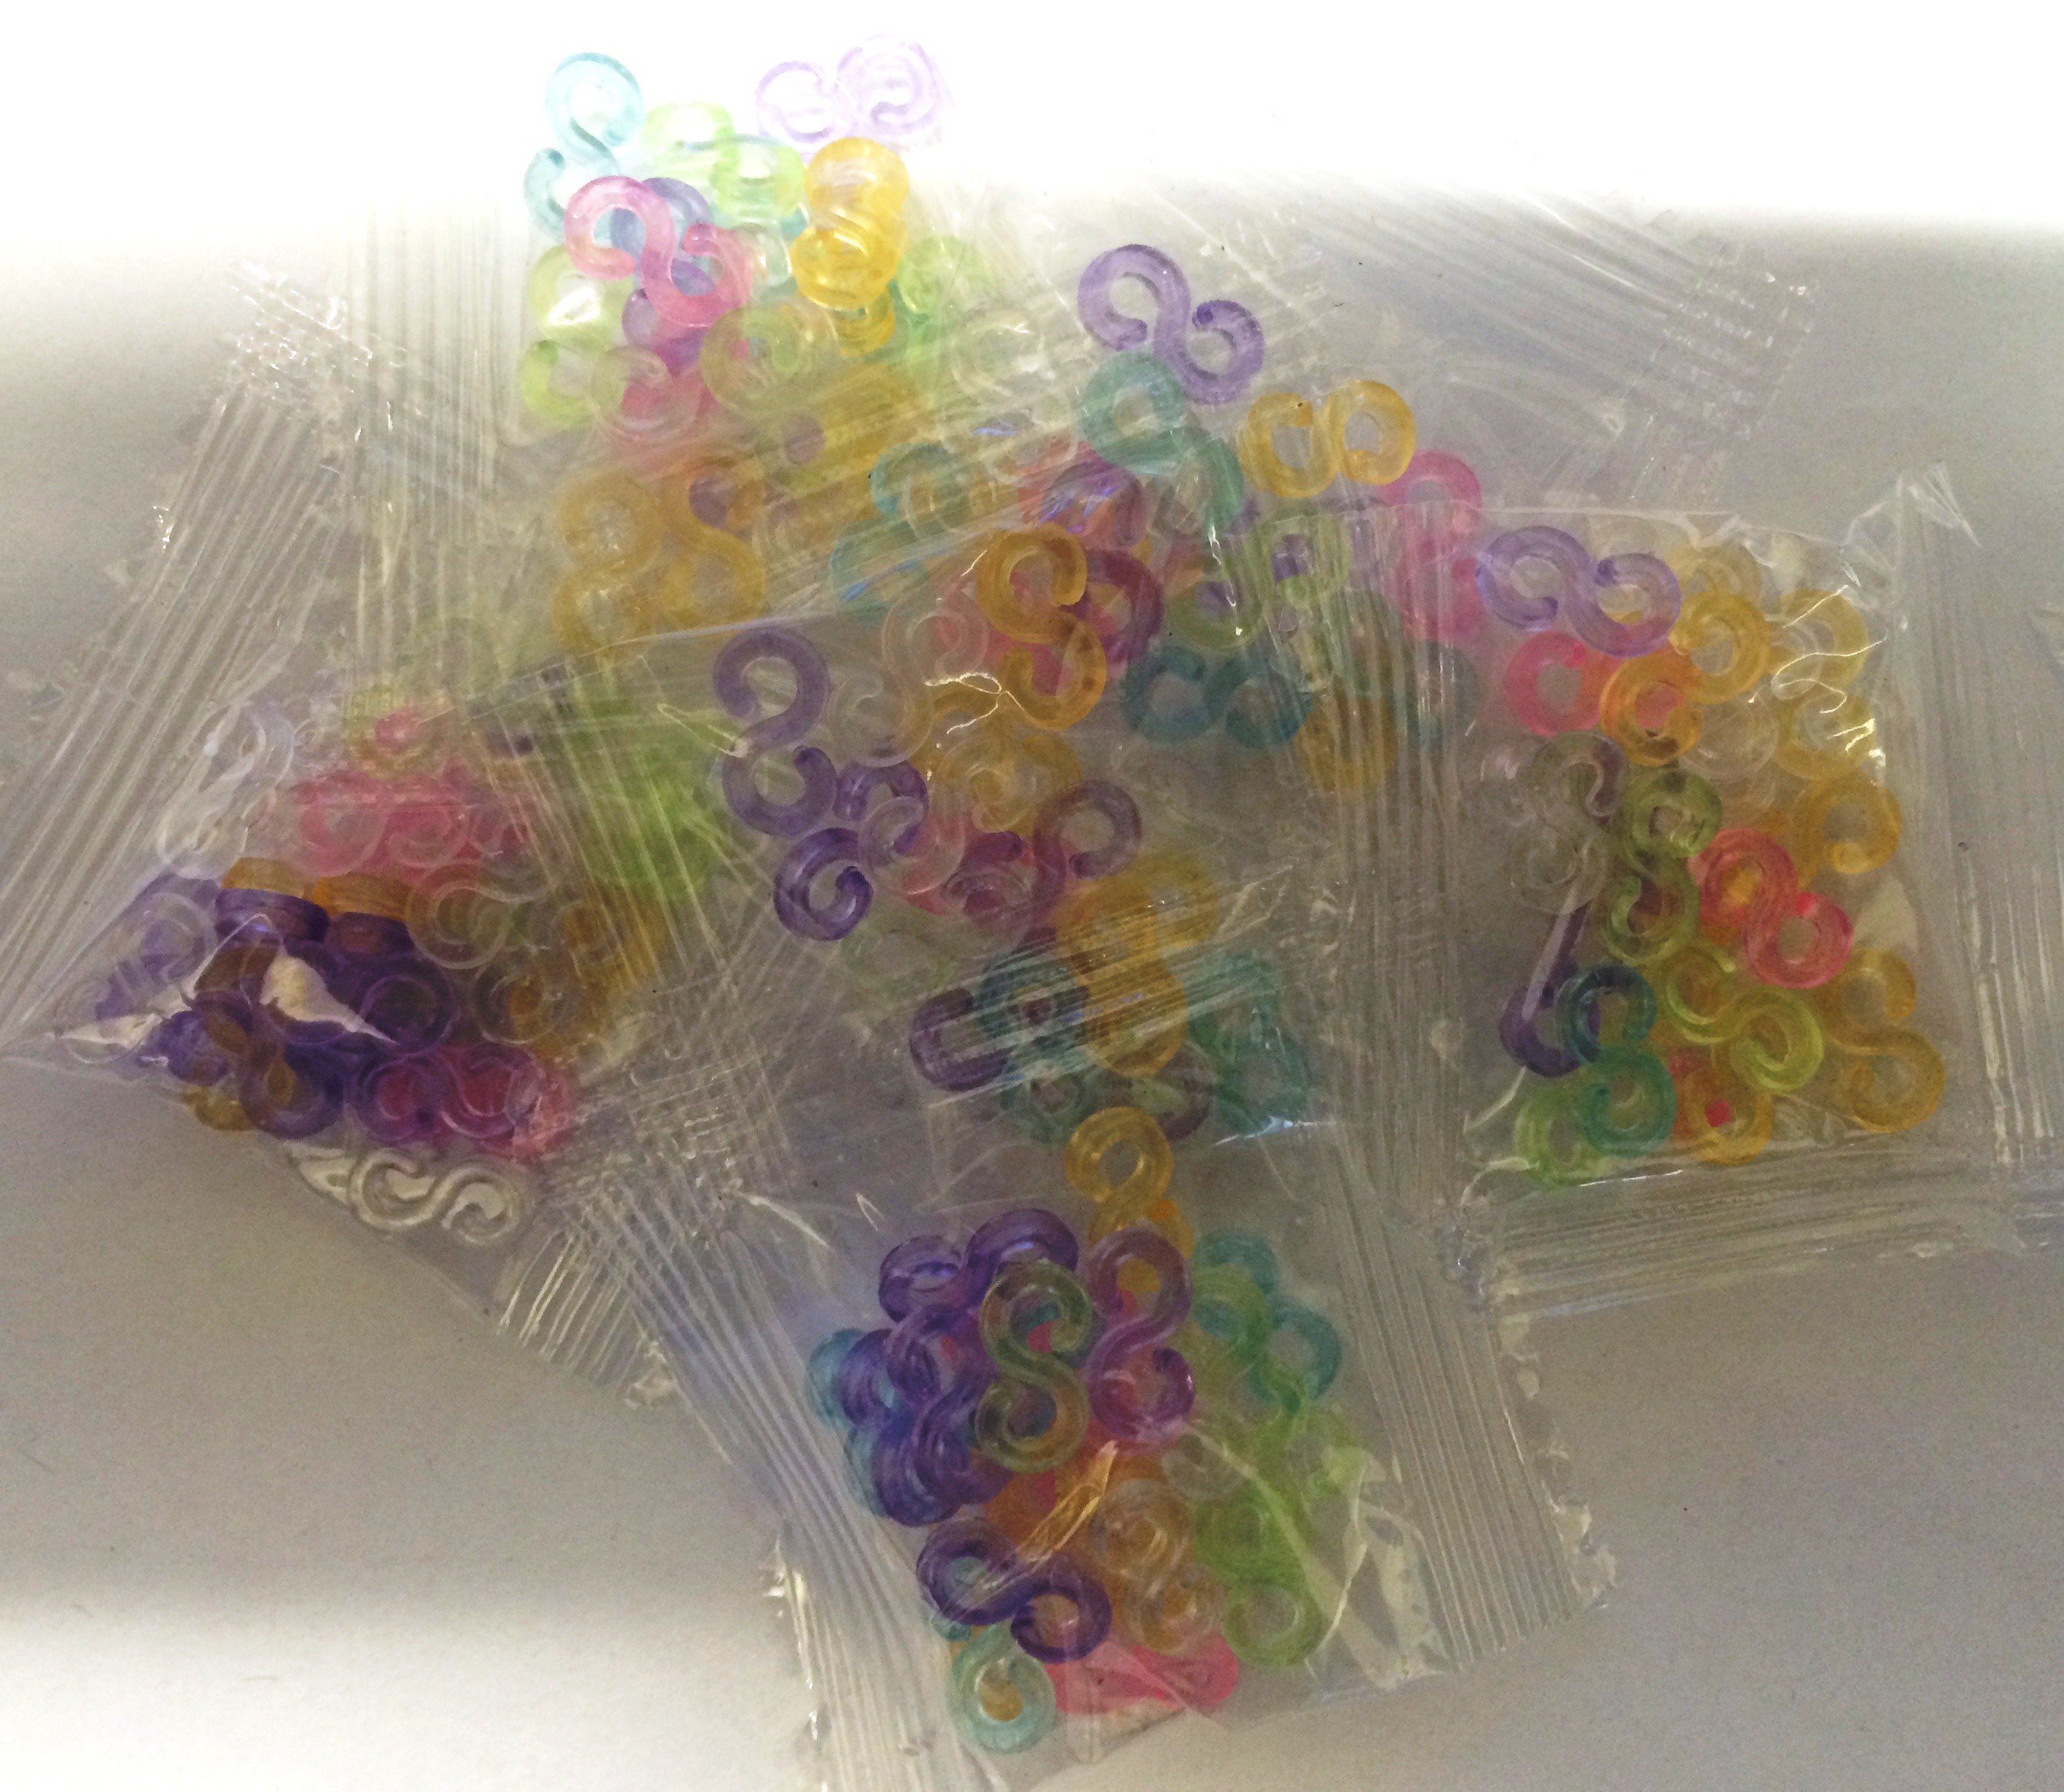 5 Packs of 24 S Clips For Loom Bands